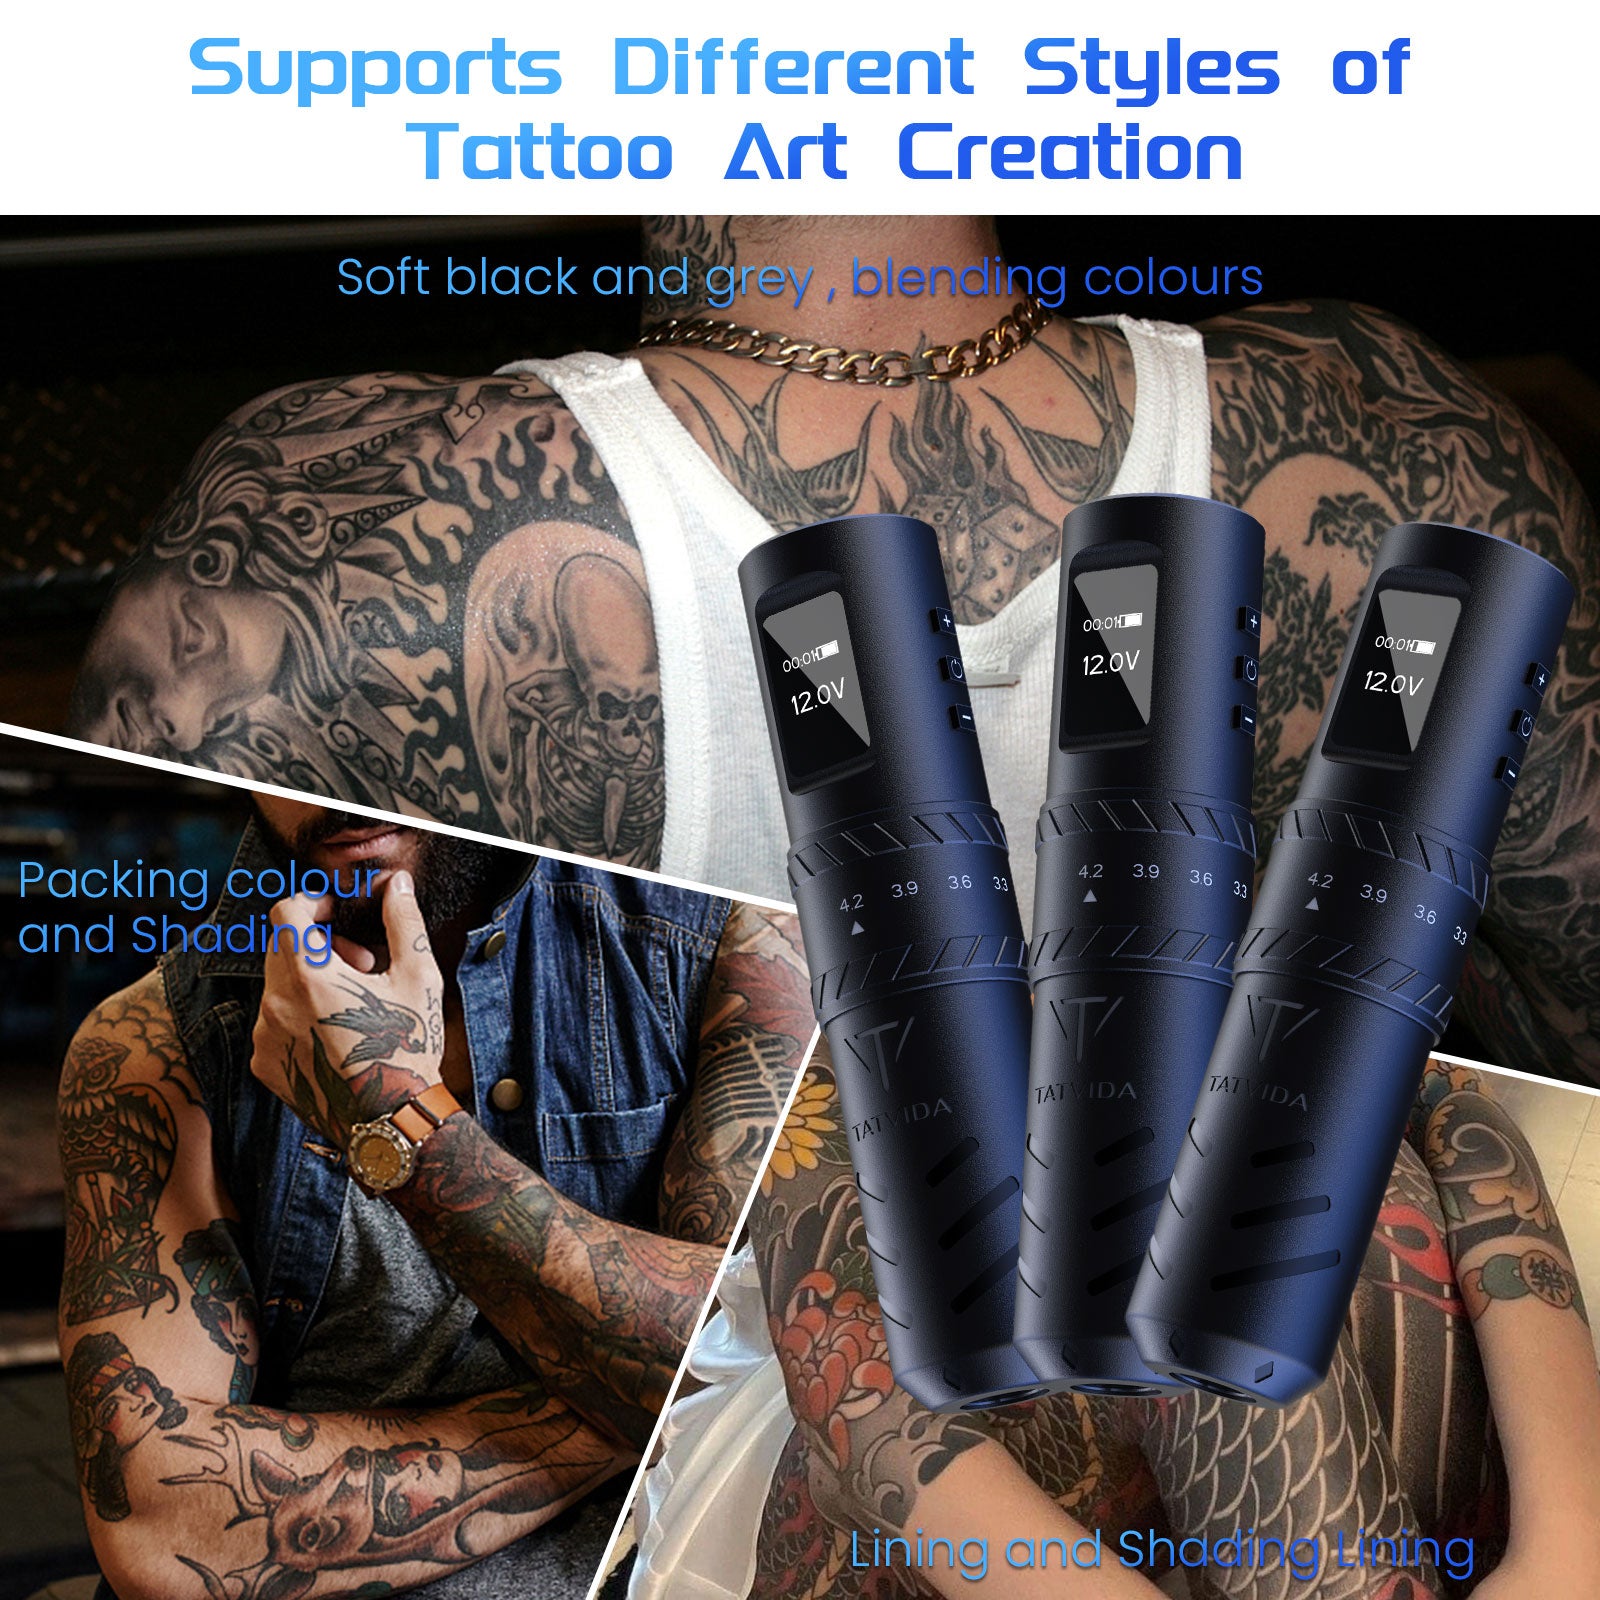 Supports Different Styles of Tattoo Art Creation